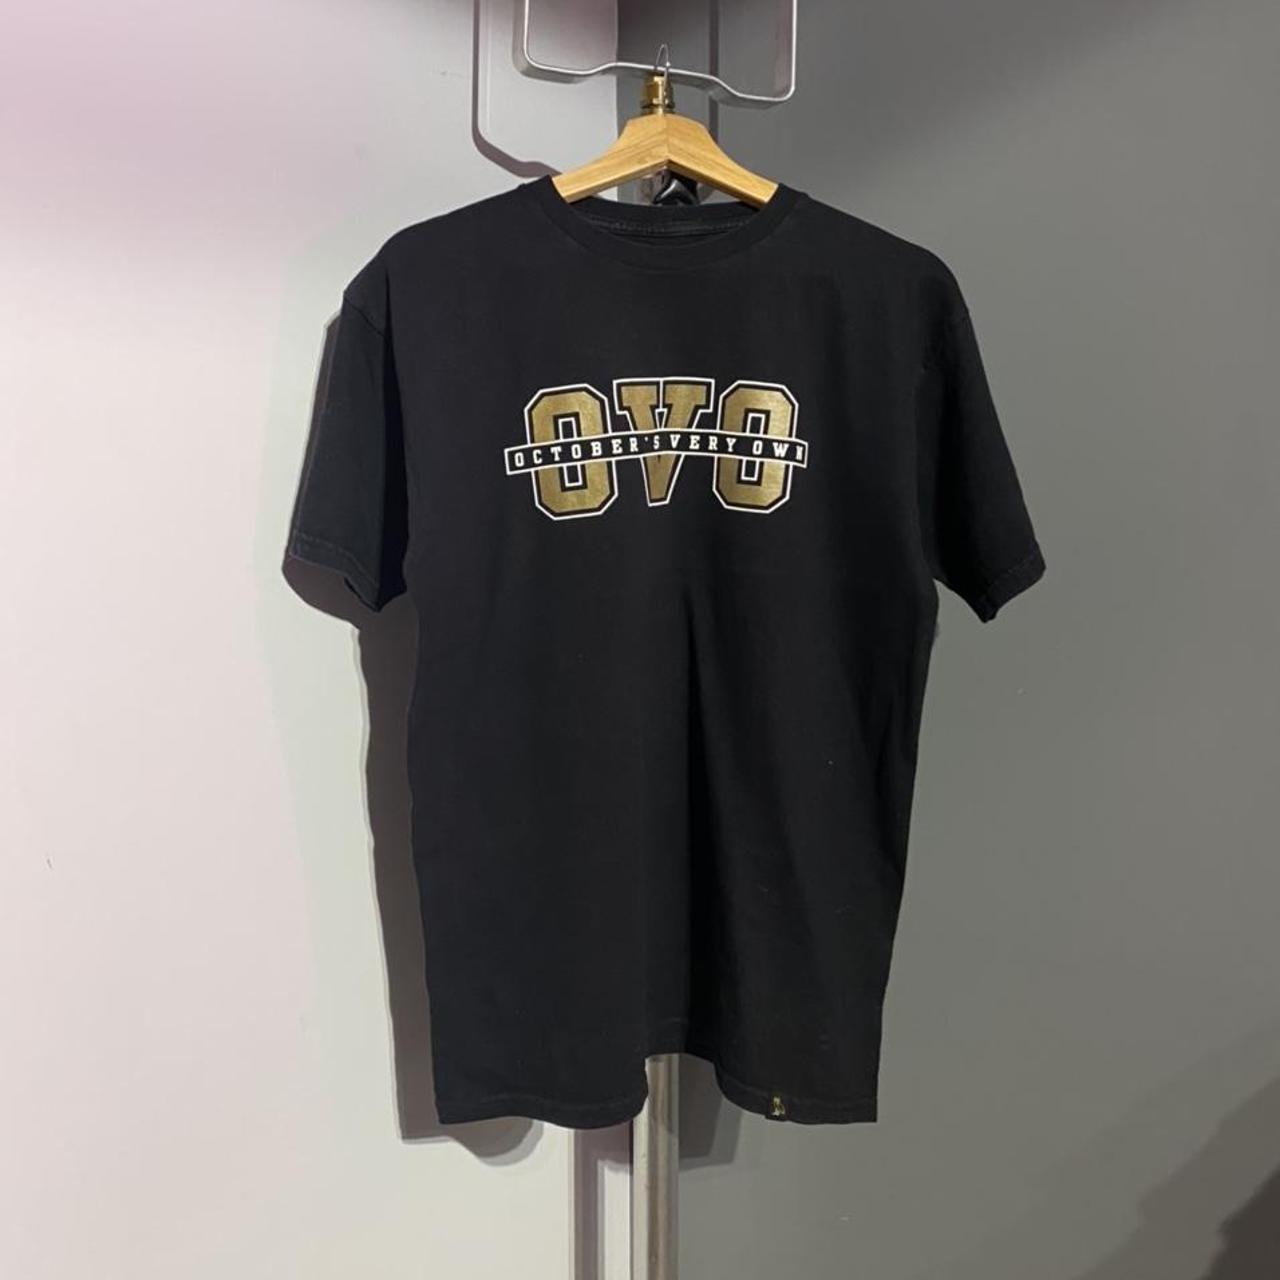 Octobers Very Own Men's Black and Gold T-shirt | Depop